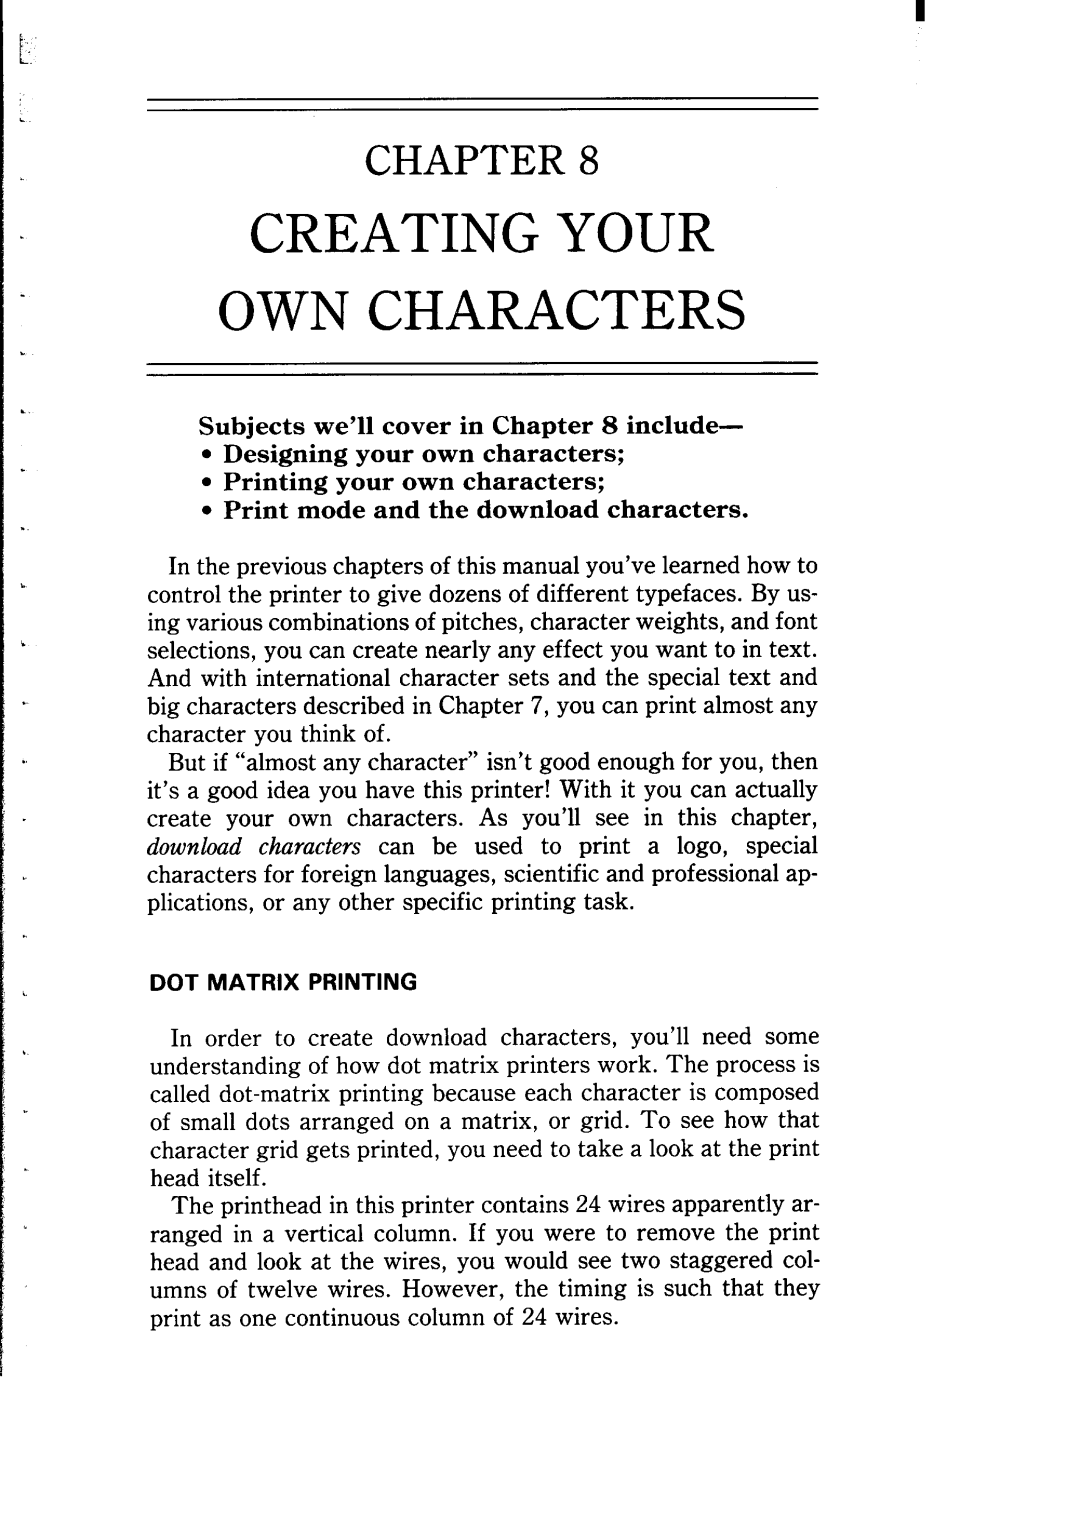 Star Micronics NB-15 user manual Creating Your Own Characters, Chapter, Subjects we’ll cover in include 